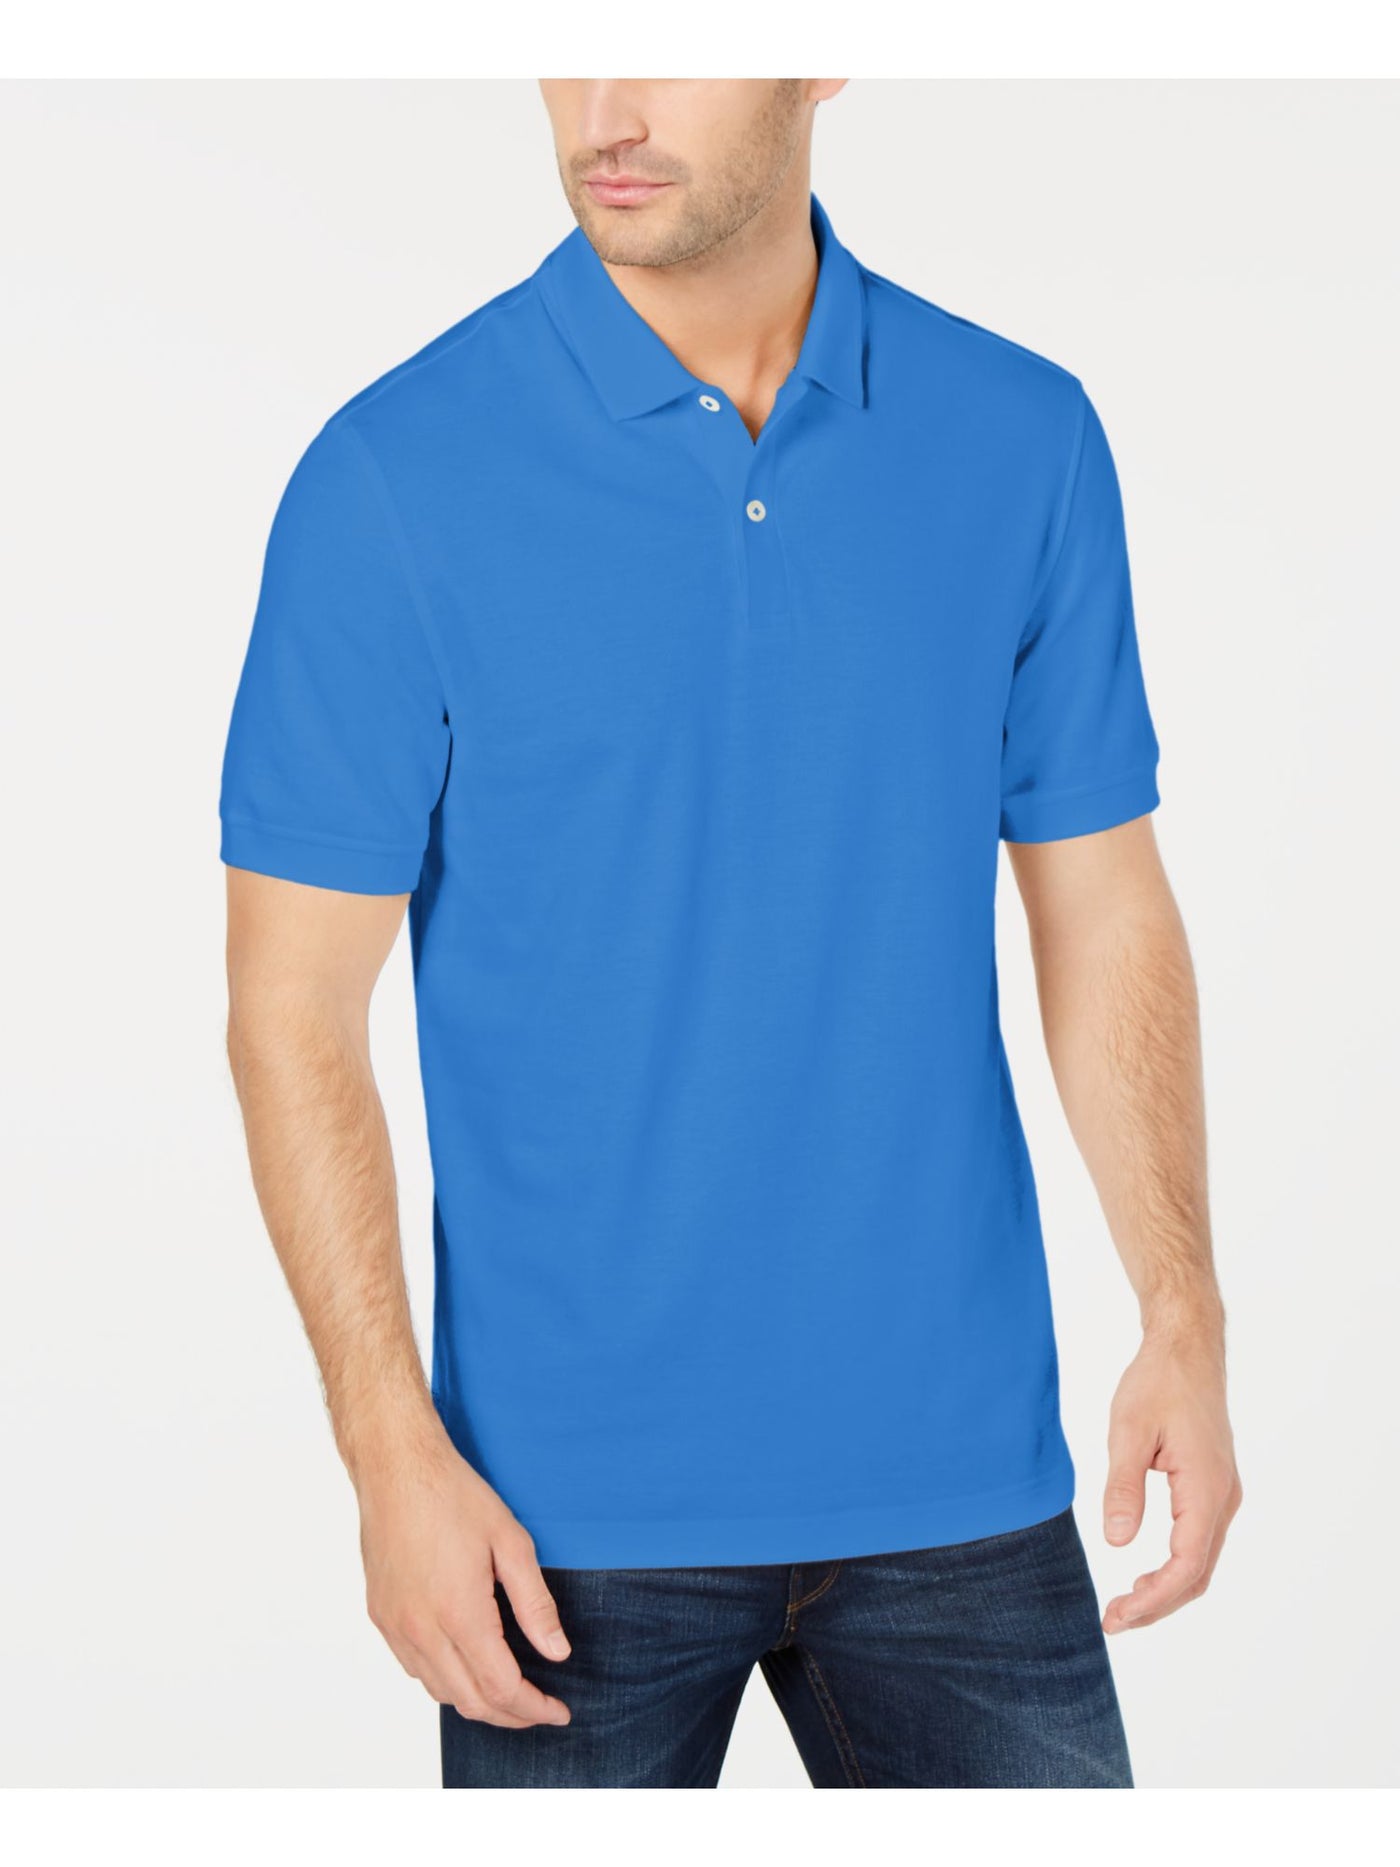 CLUBROOM Mens Blue Classic Fit Performance Stretch Polo S